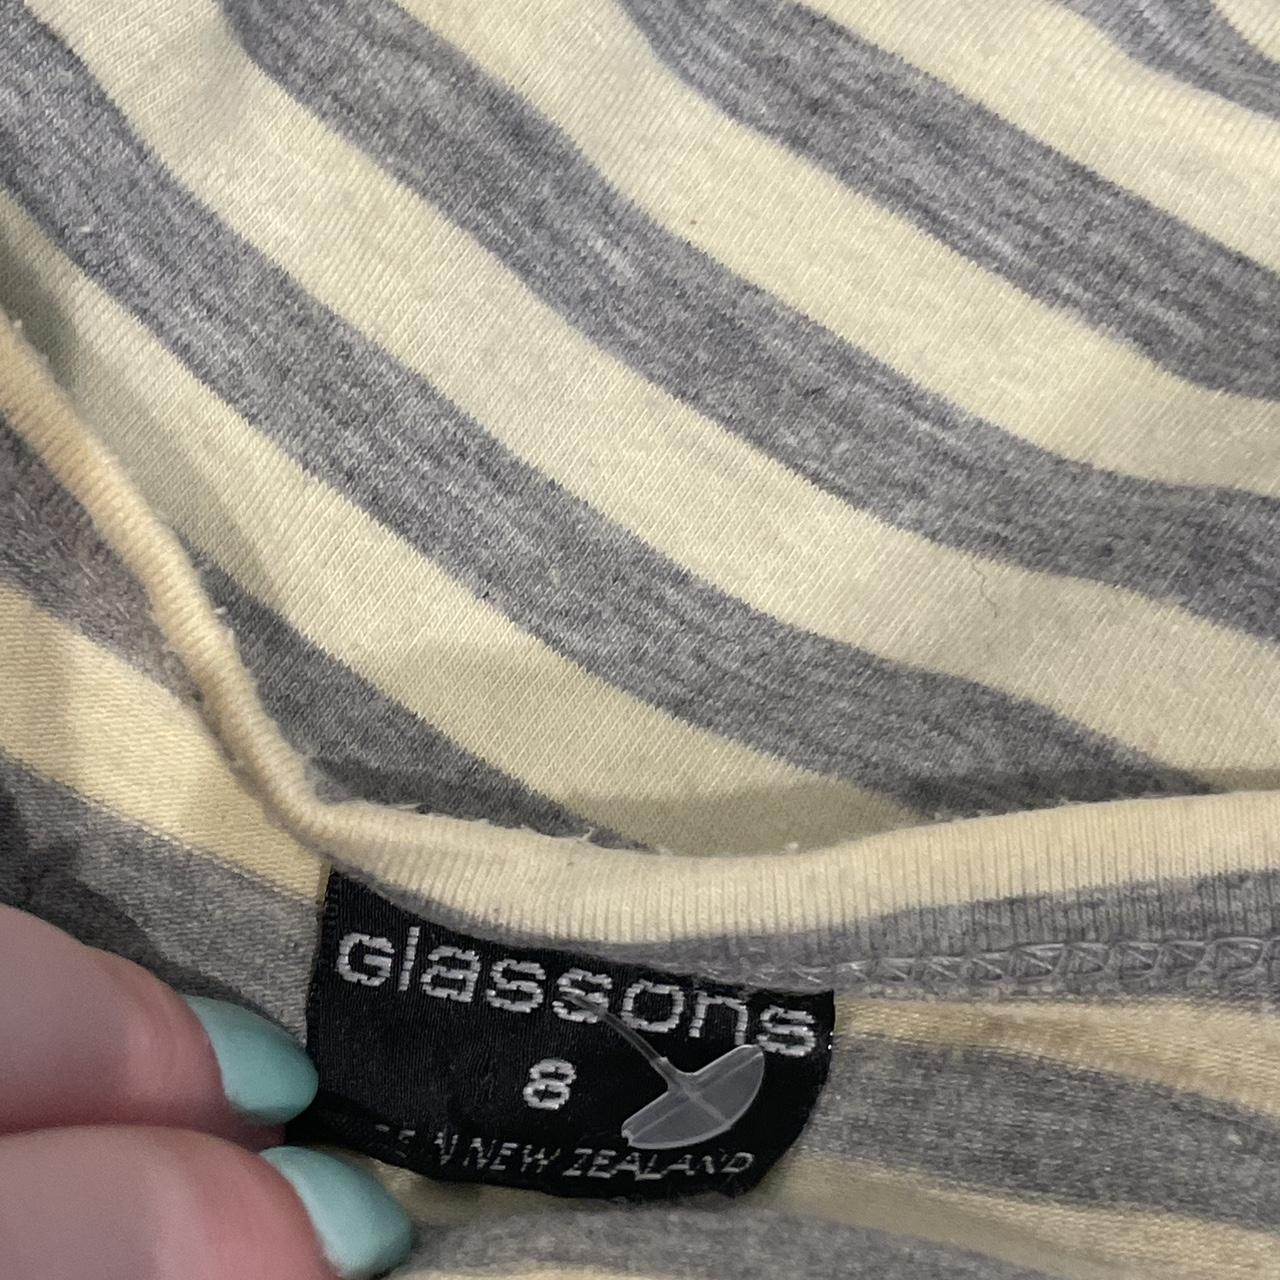 Glassons Women's Yellow and Grey Top | Depop